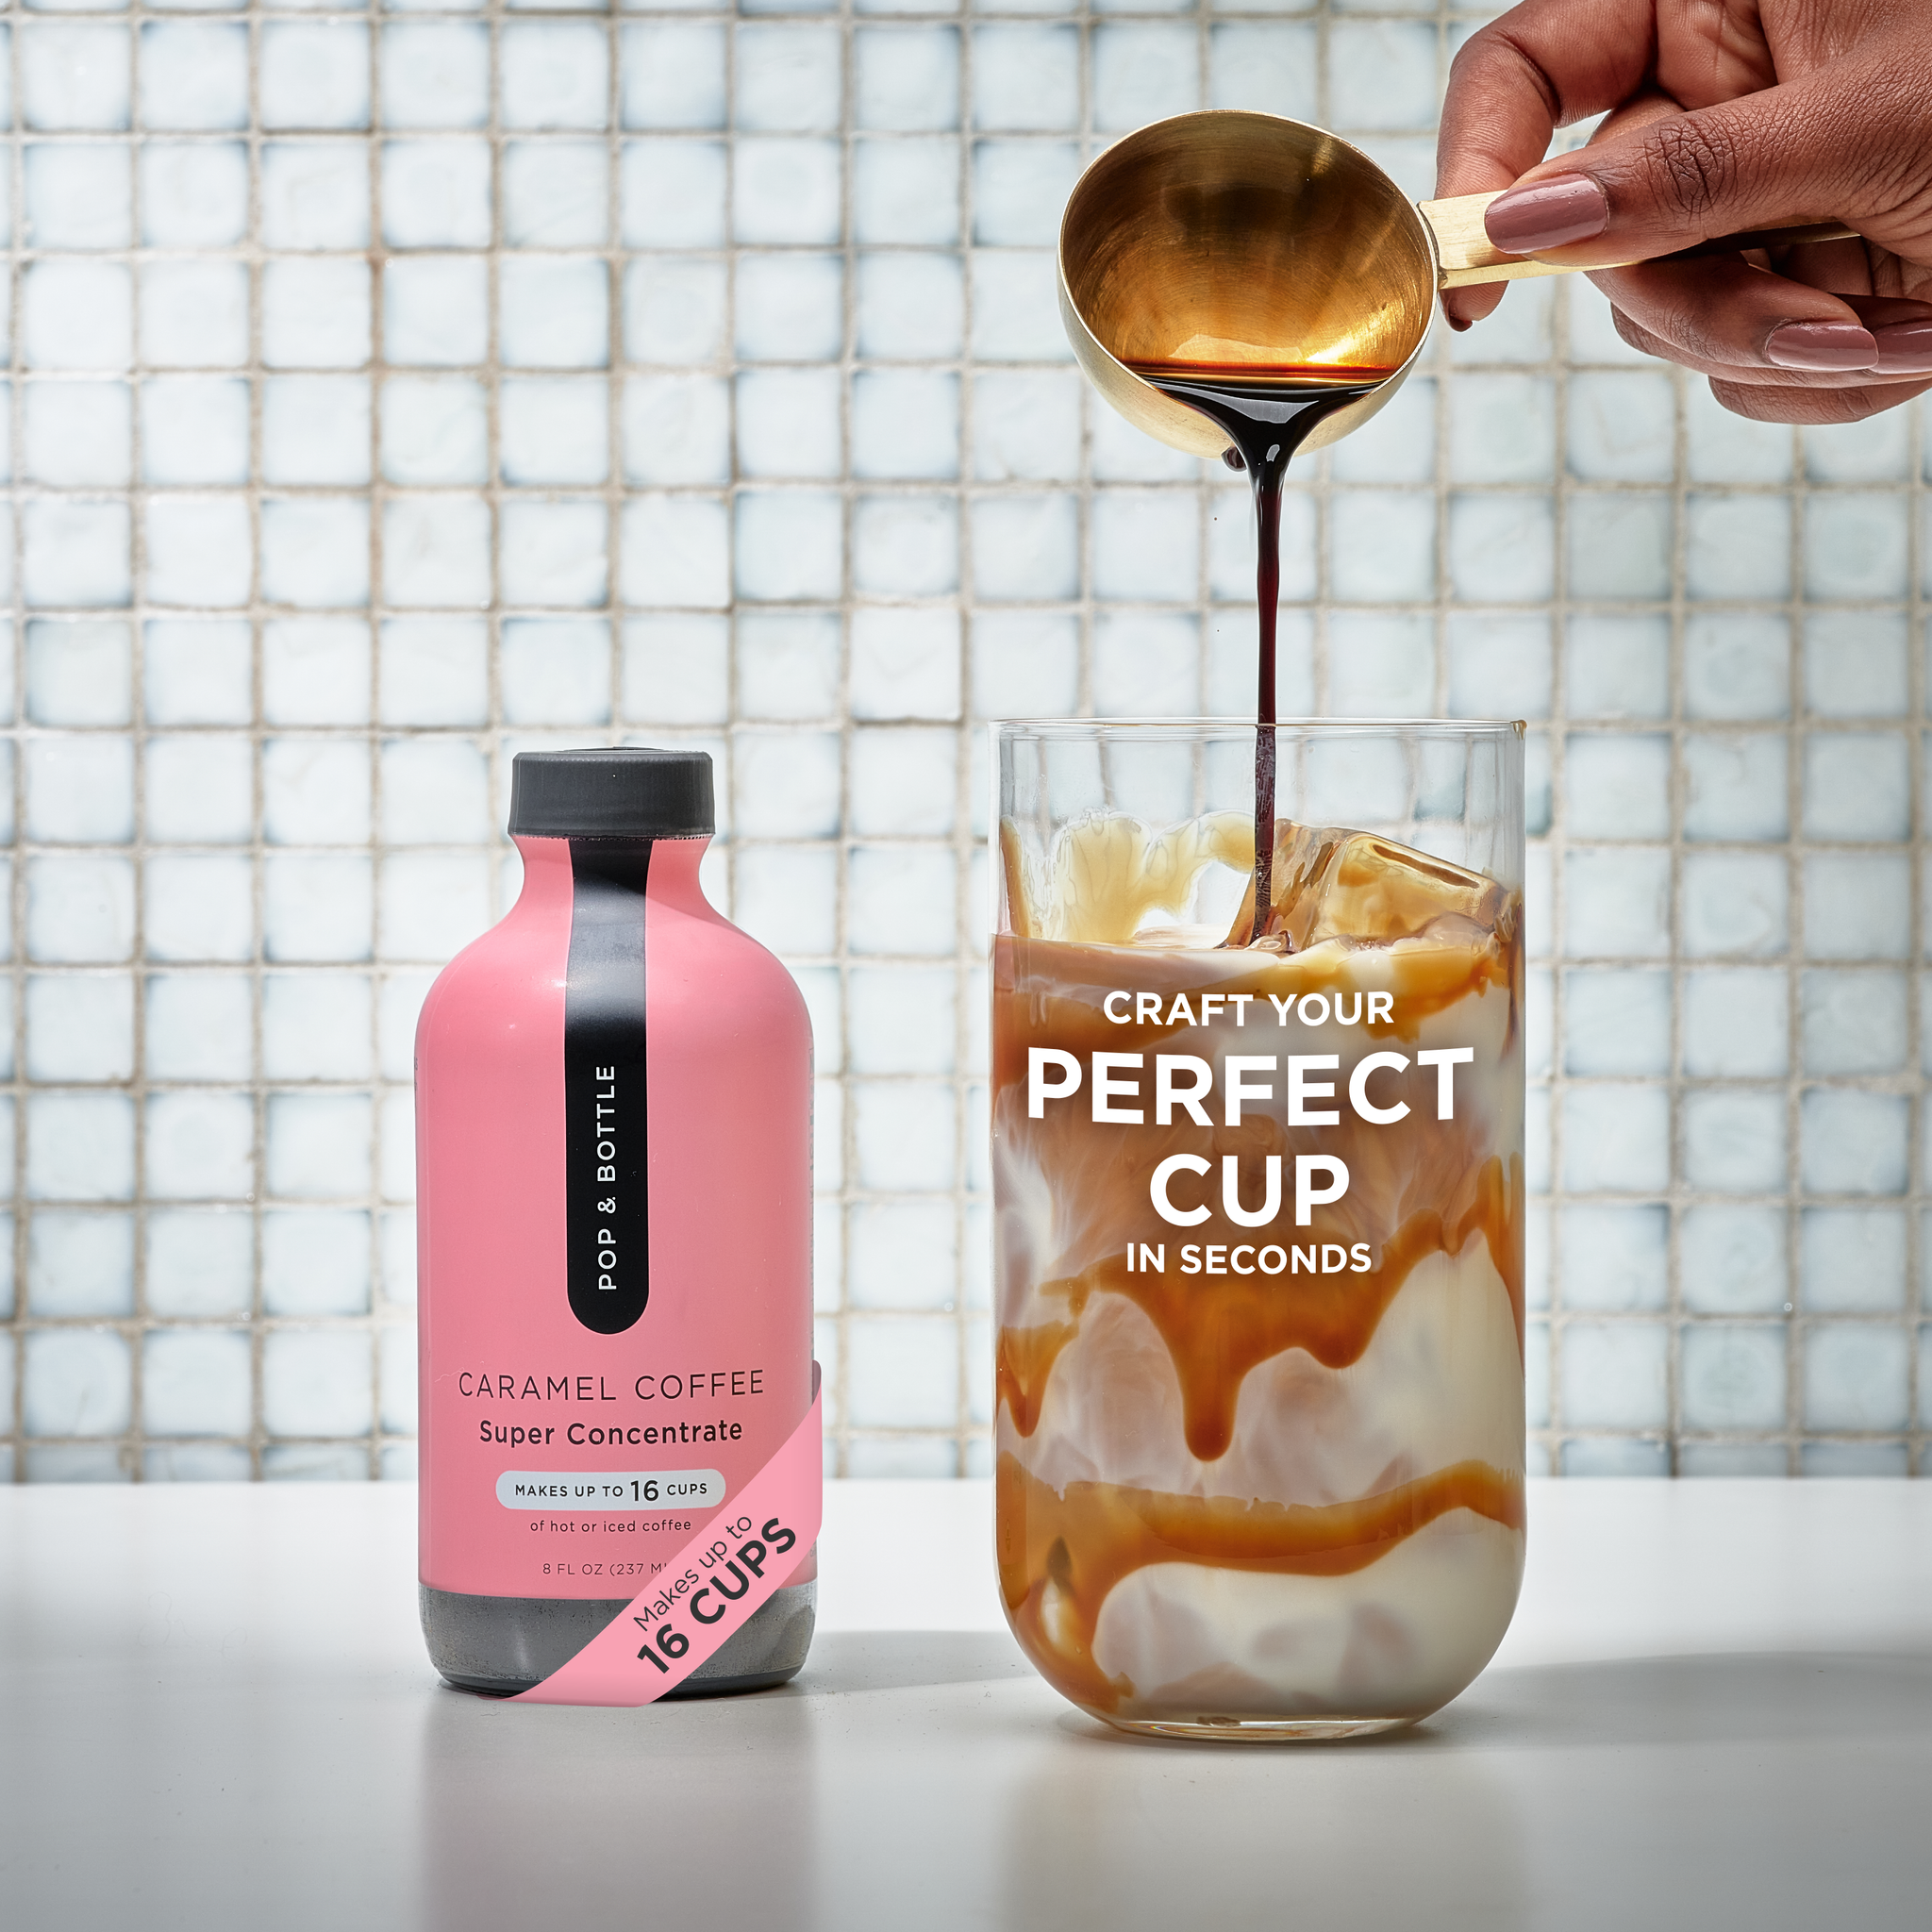 Pop & Bottle Super Concentrate Liquid- Cold Brew, Hot or Iced Coffee, No Refined Sugar, Dairy Free, Makes Up to 16 Cups, Great Versatility, USDA